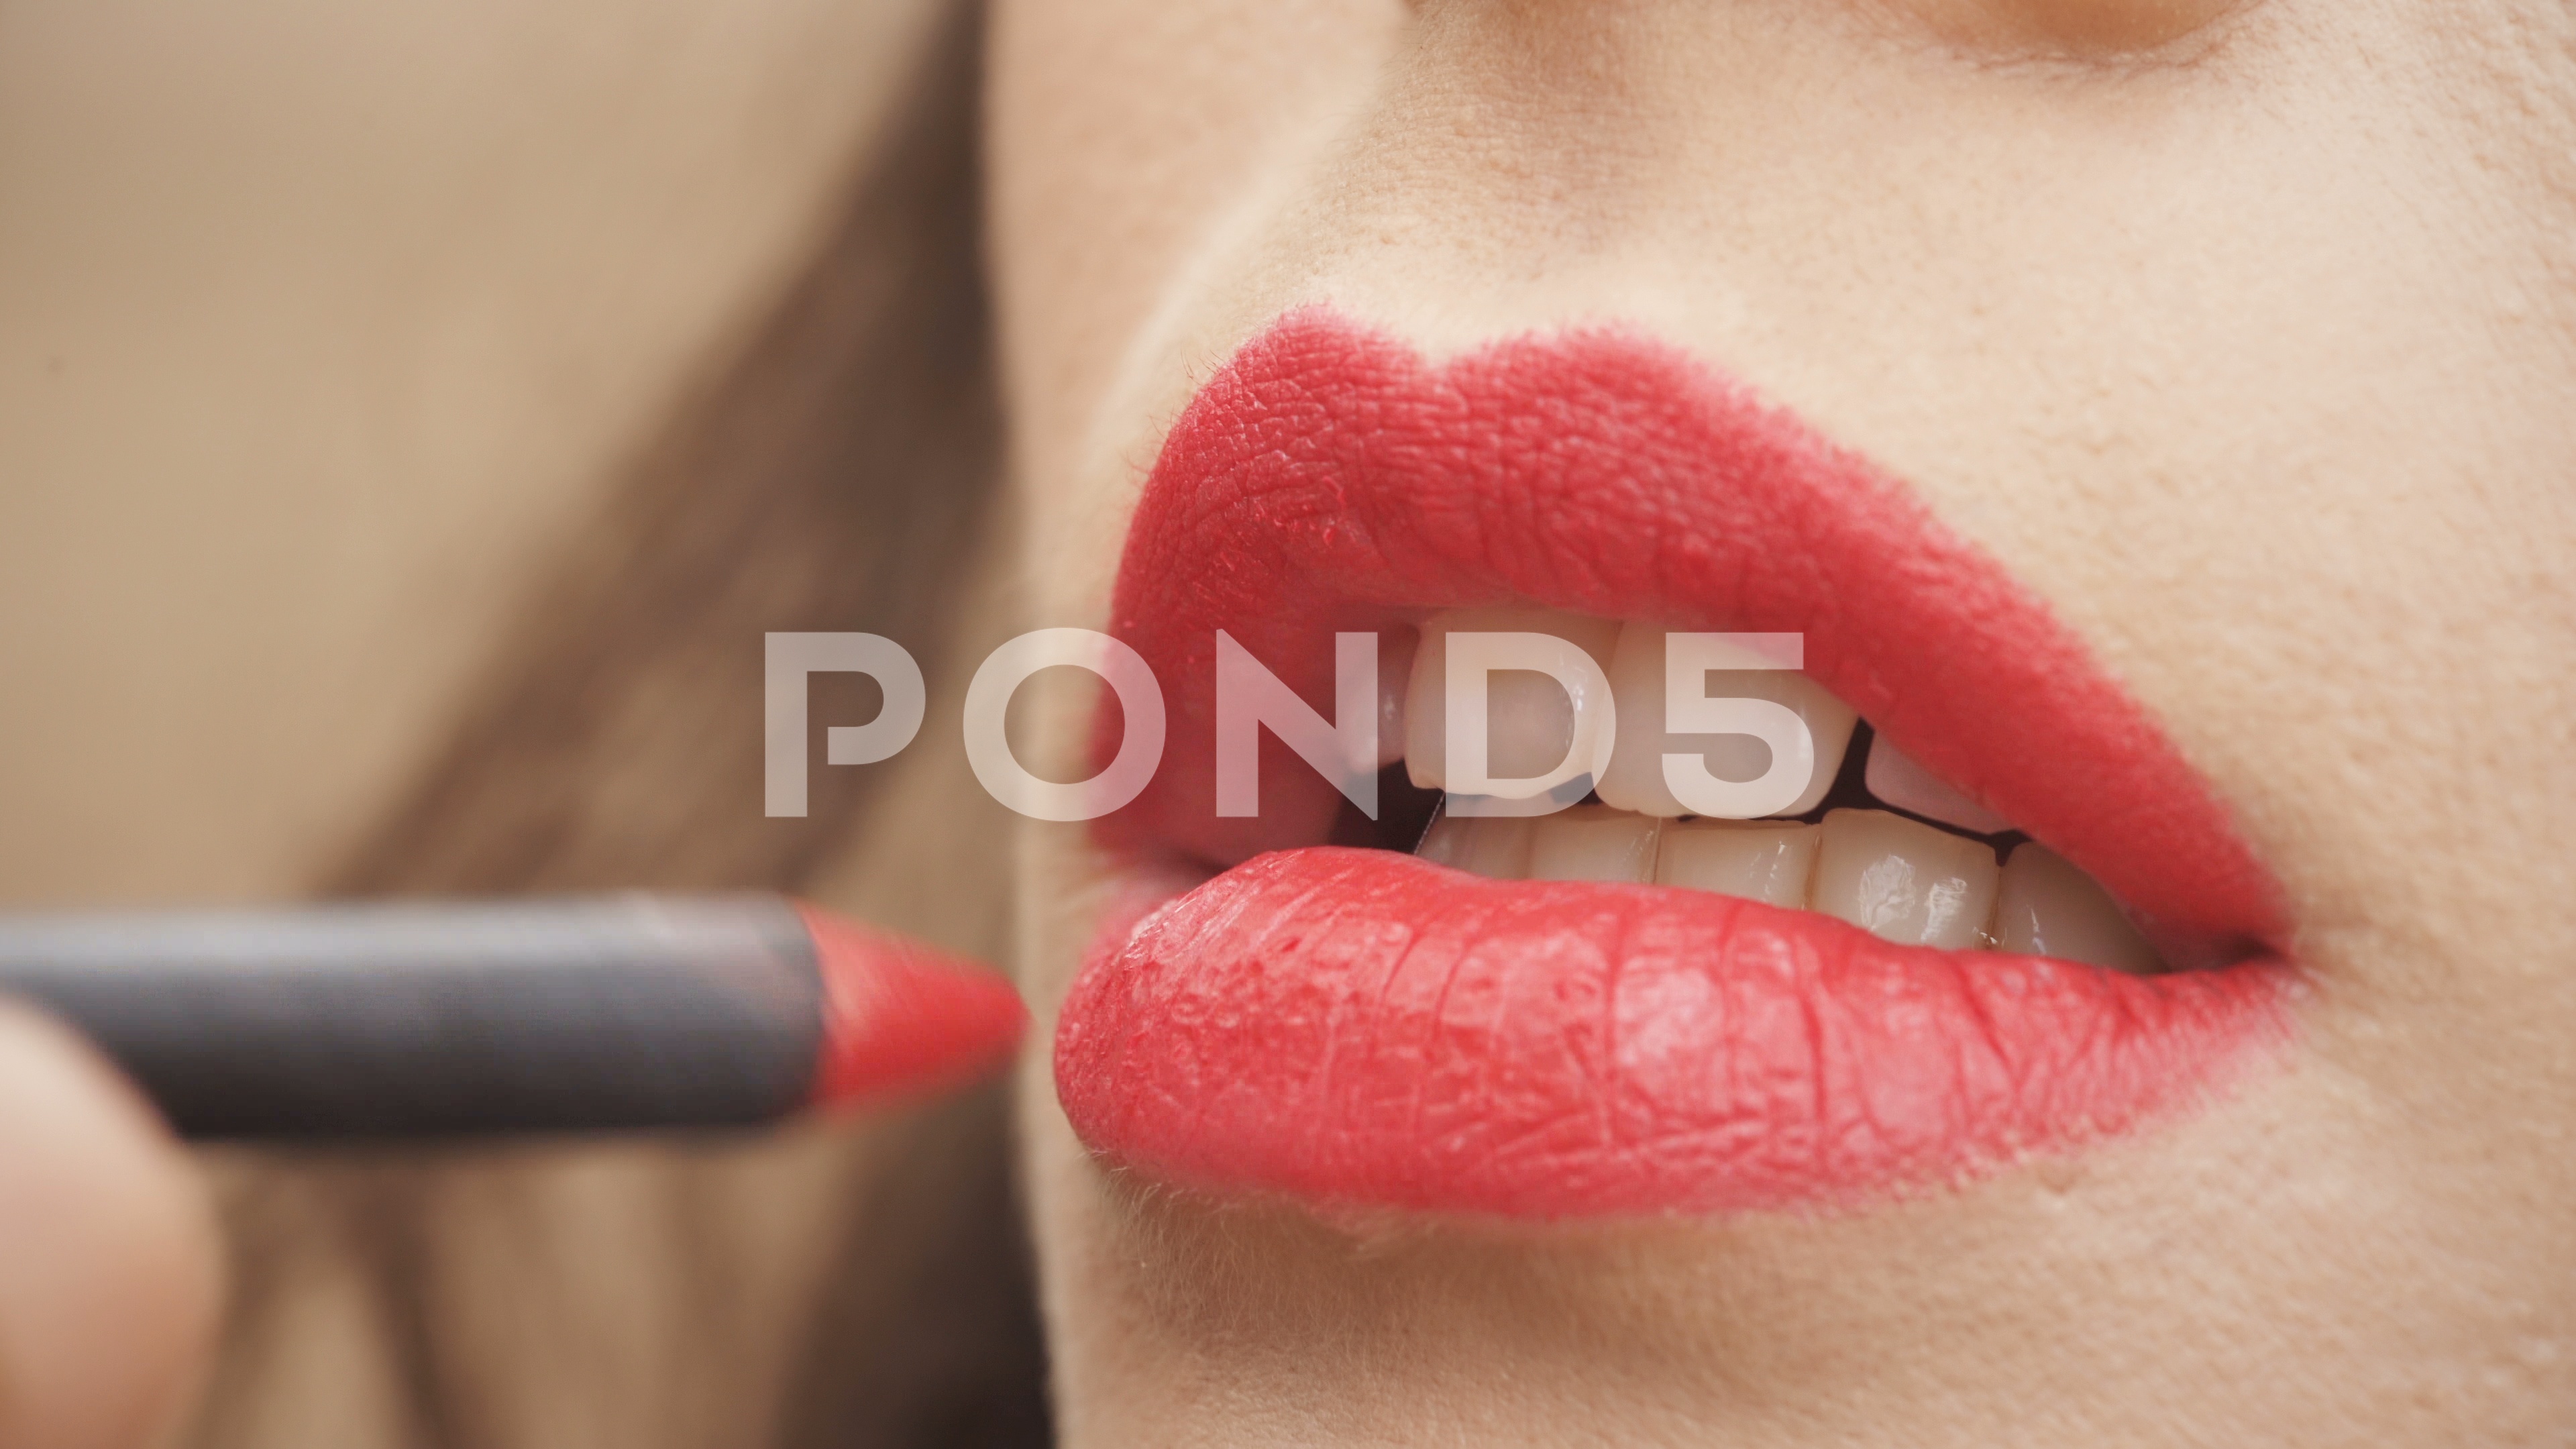 Video: Applying red lipstick with pencil on woman's lips ~ #83313119